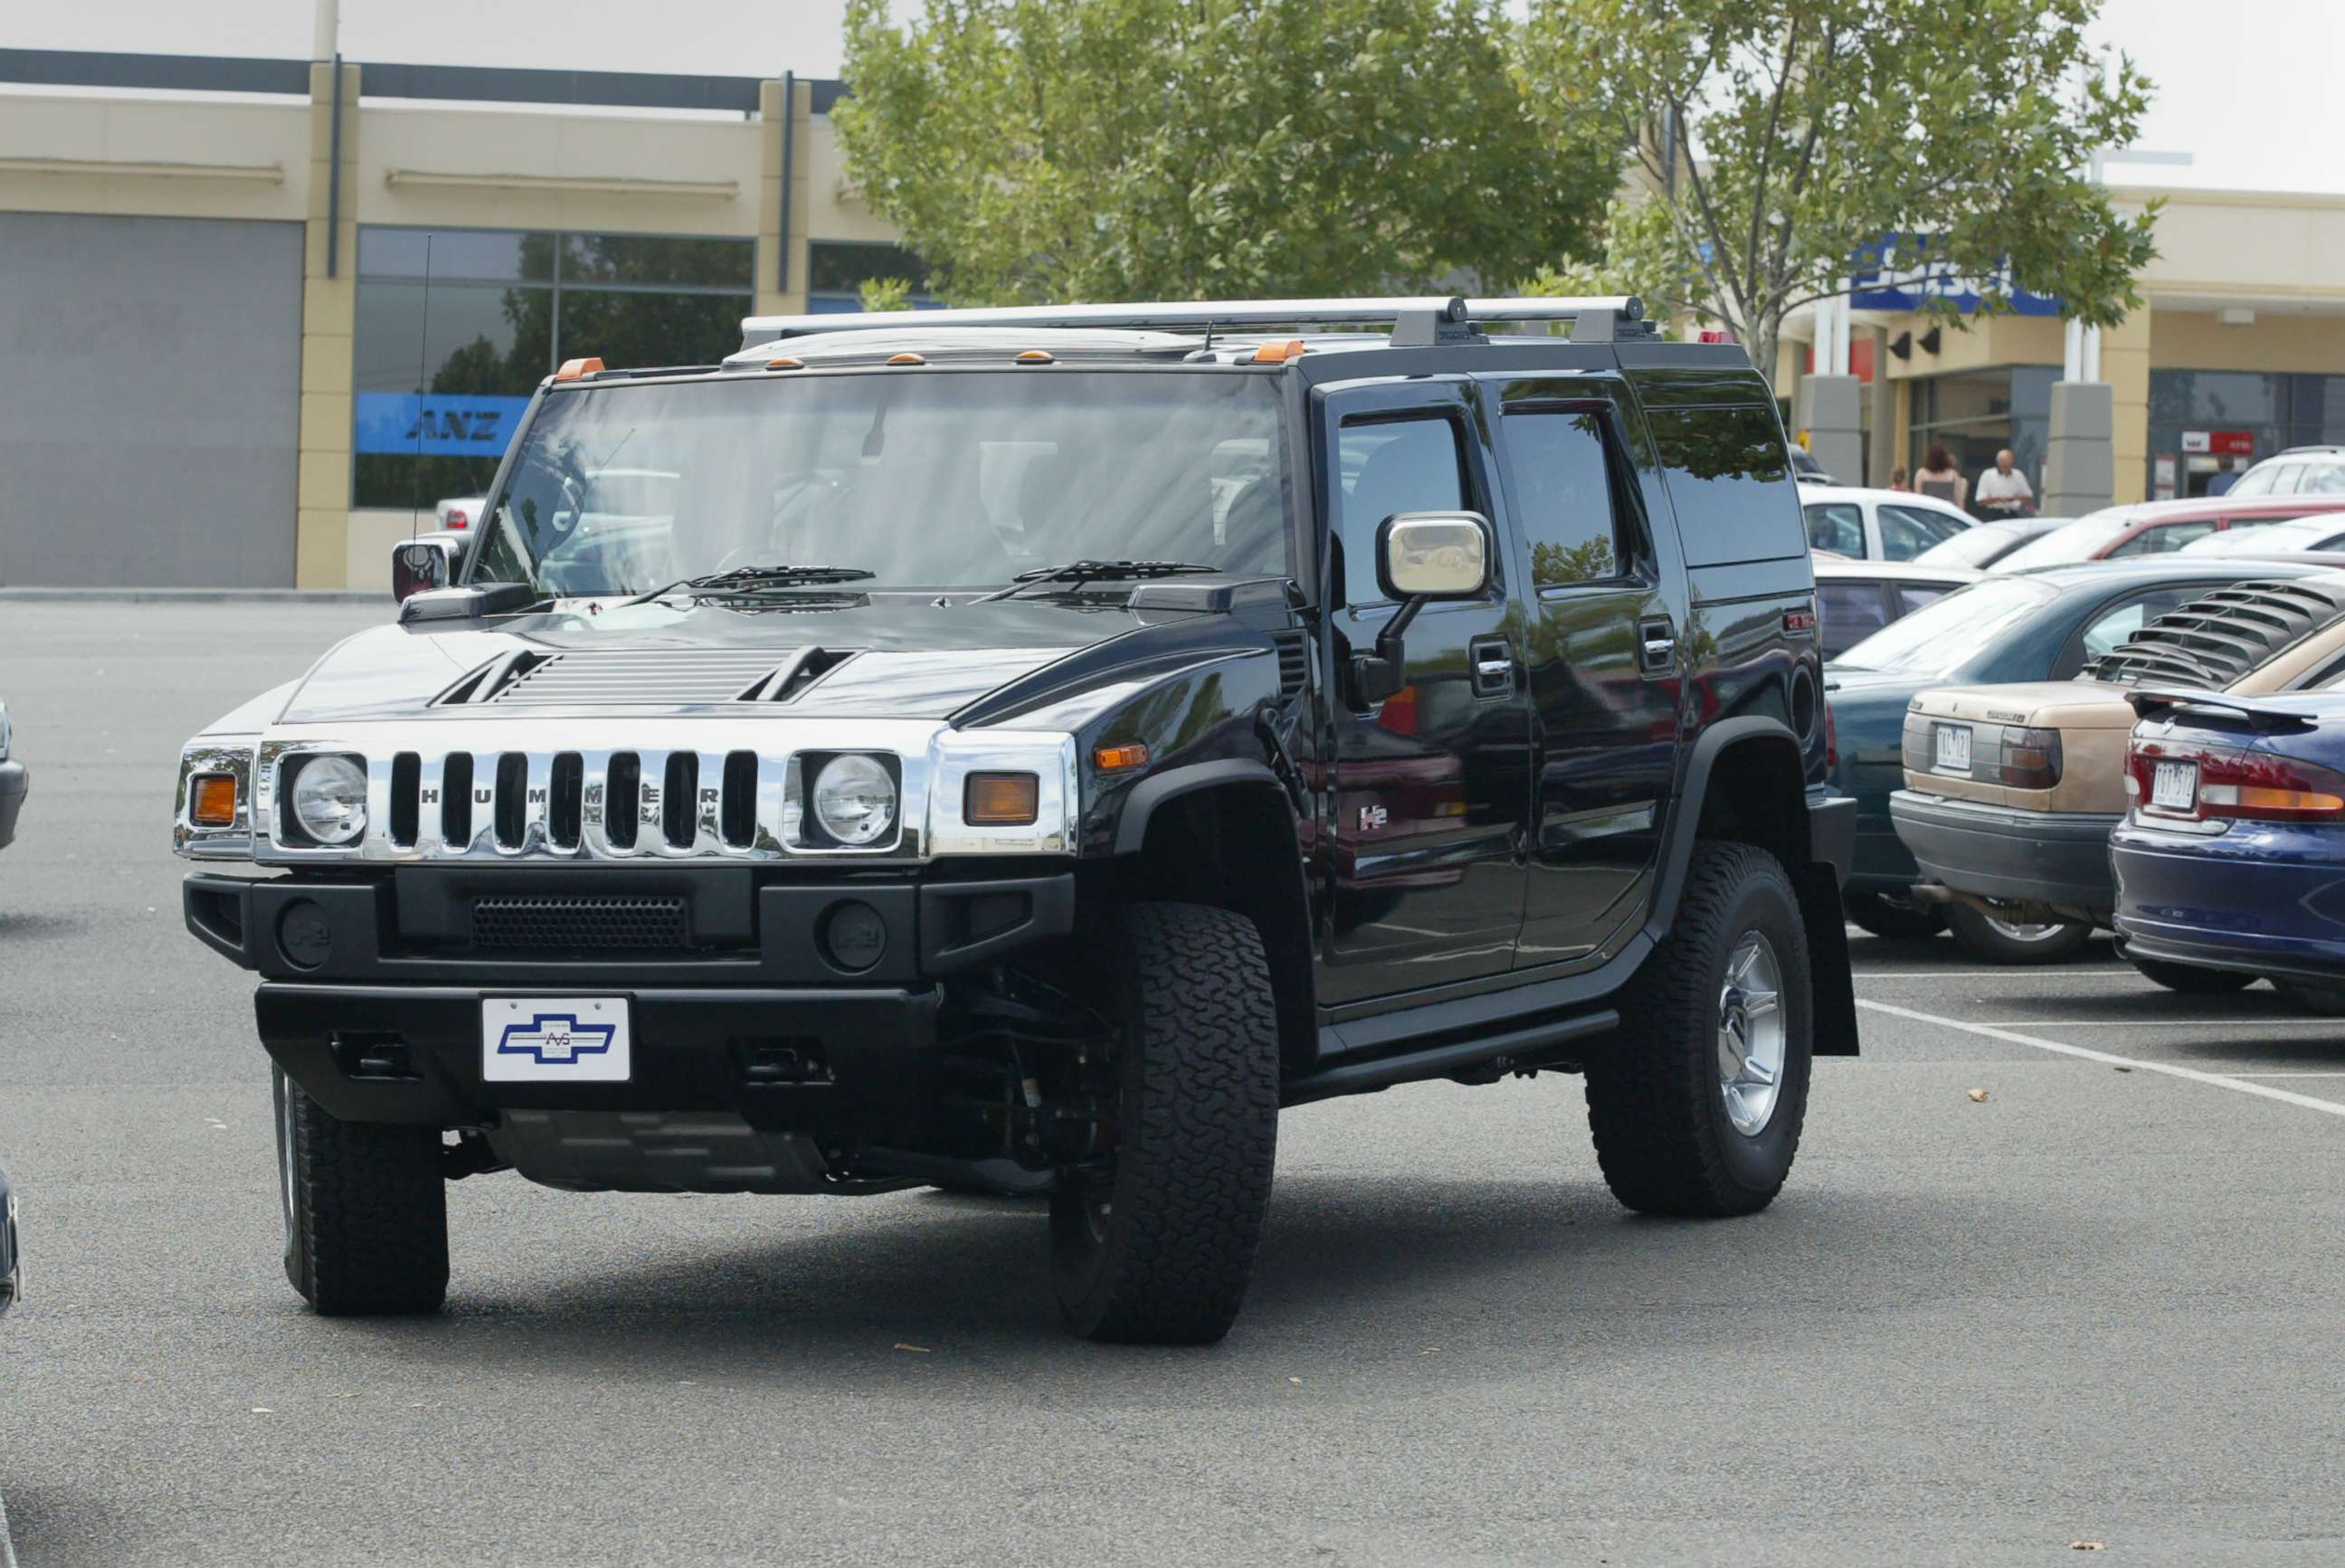 PHOTO: The Hummer H2.